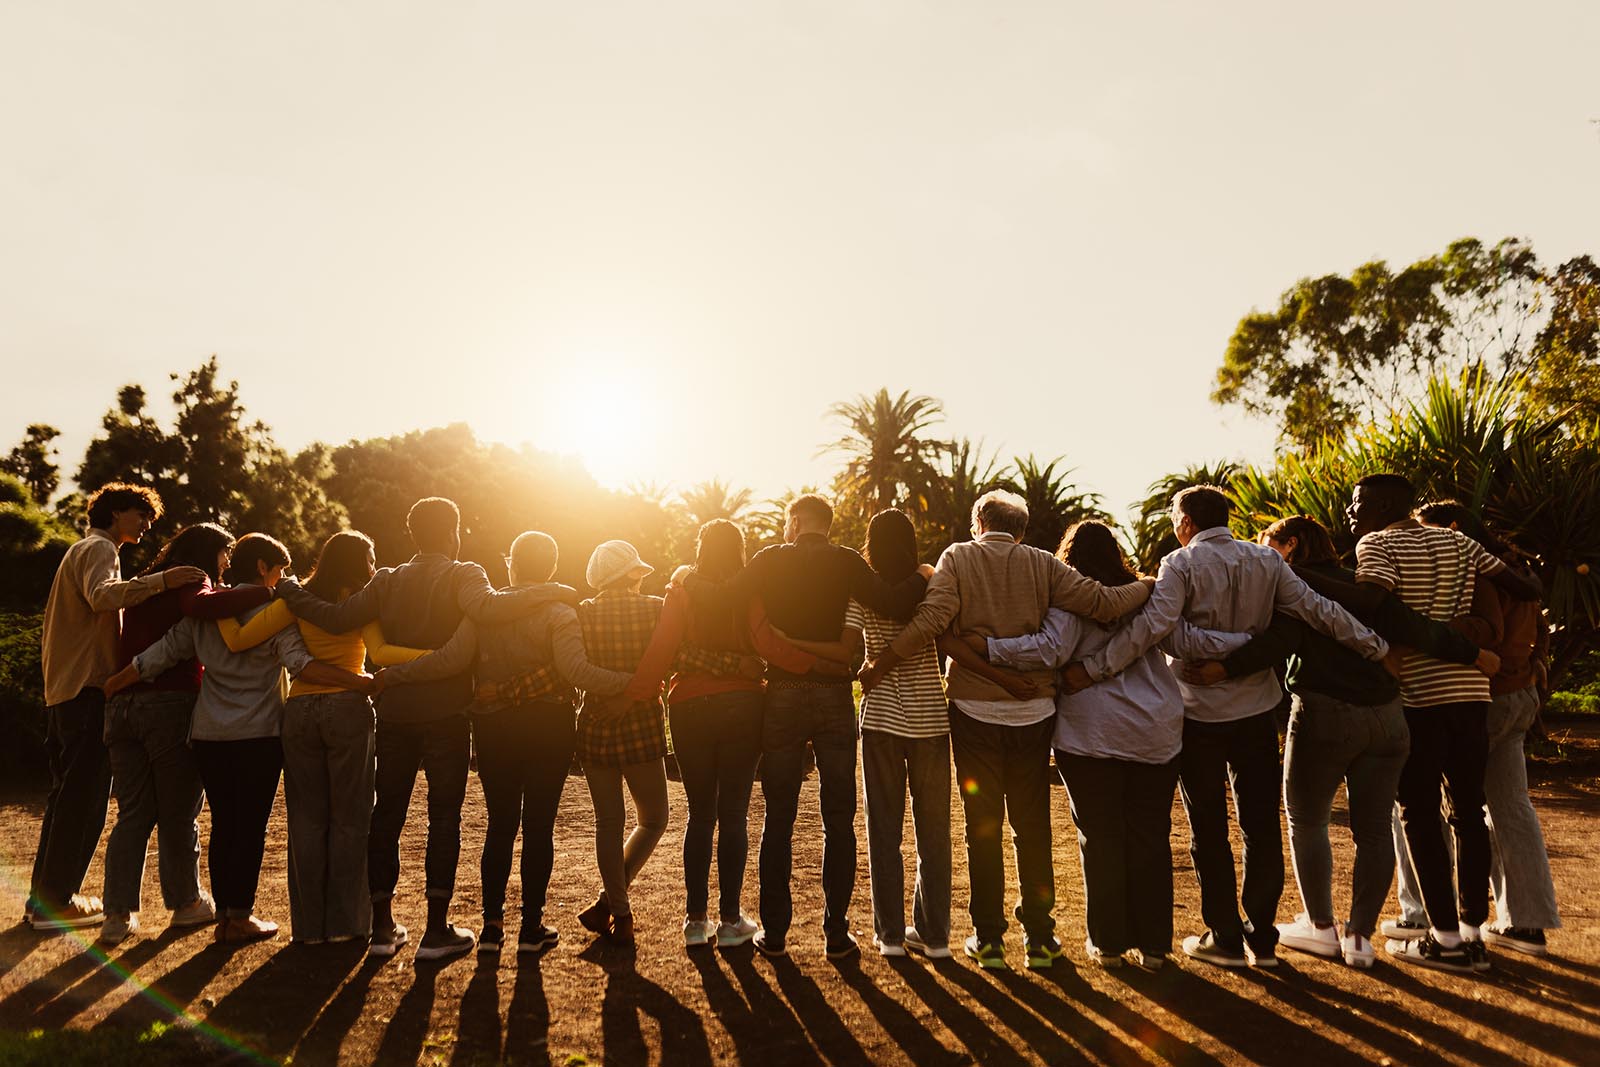 Back view of happy multigenerational people embracing in a public park during sunset